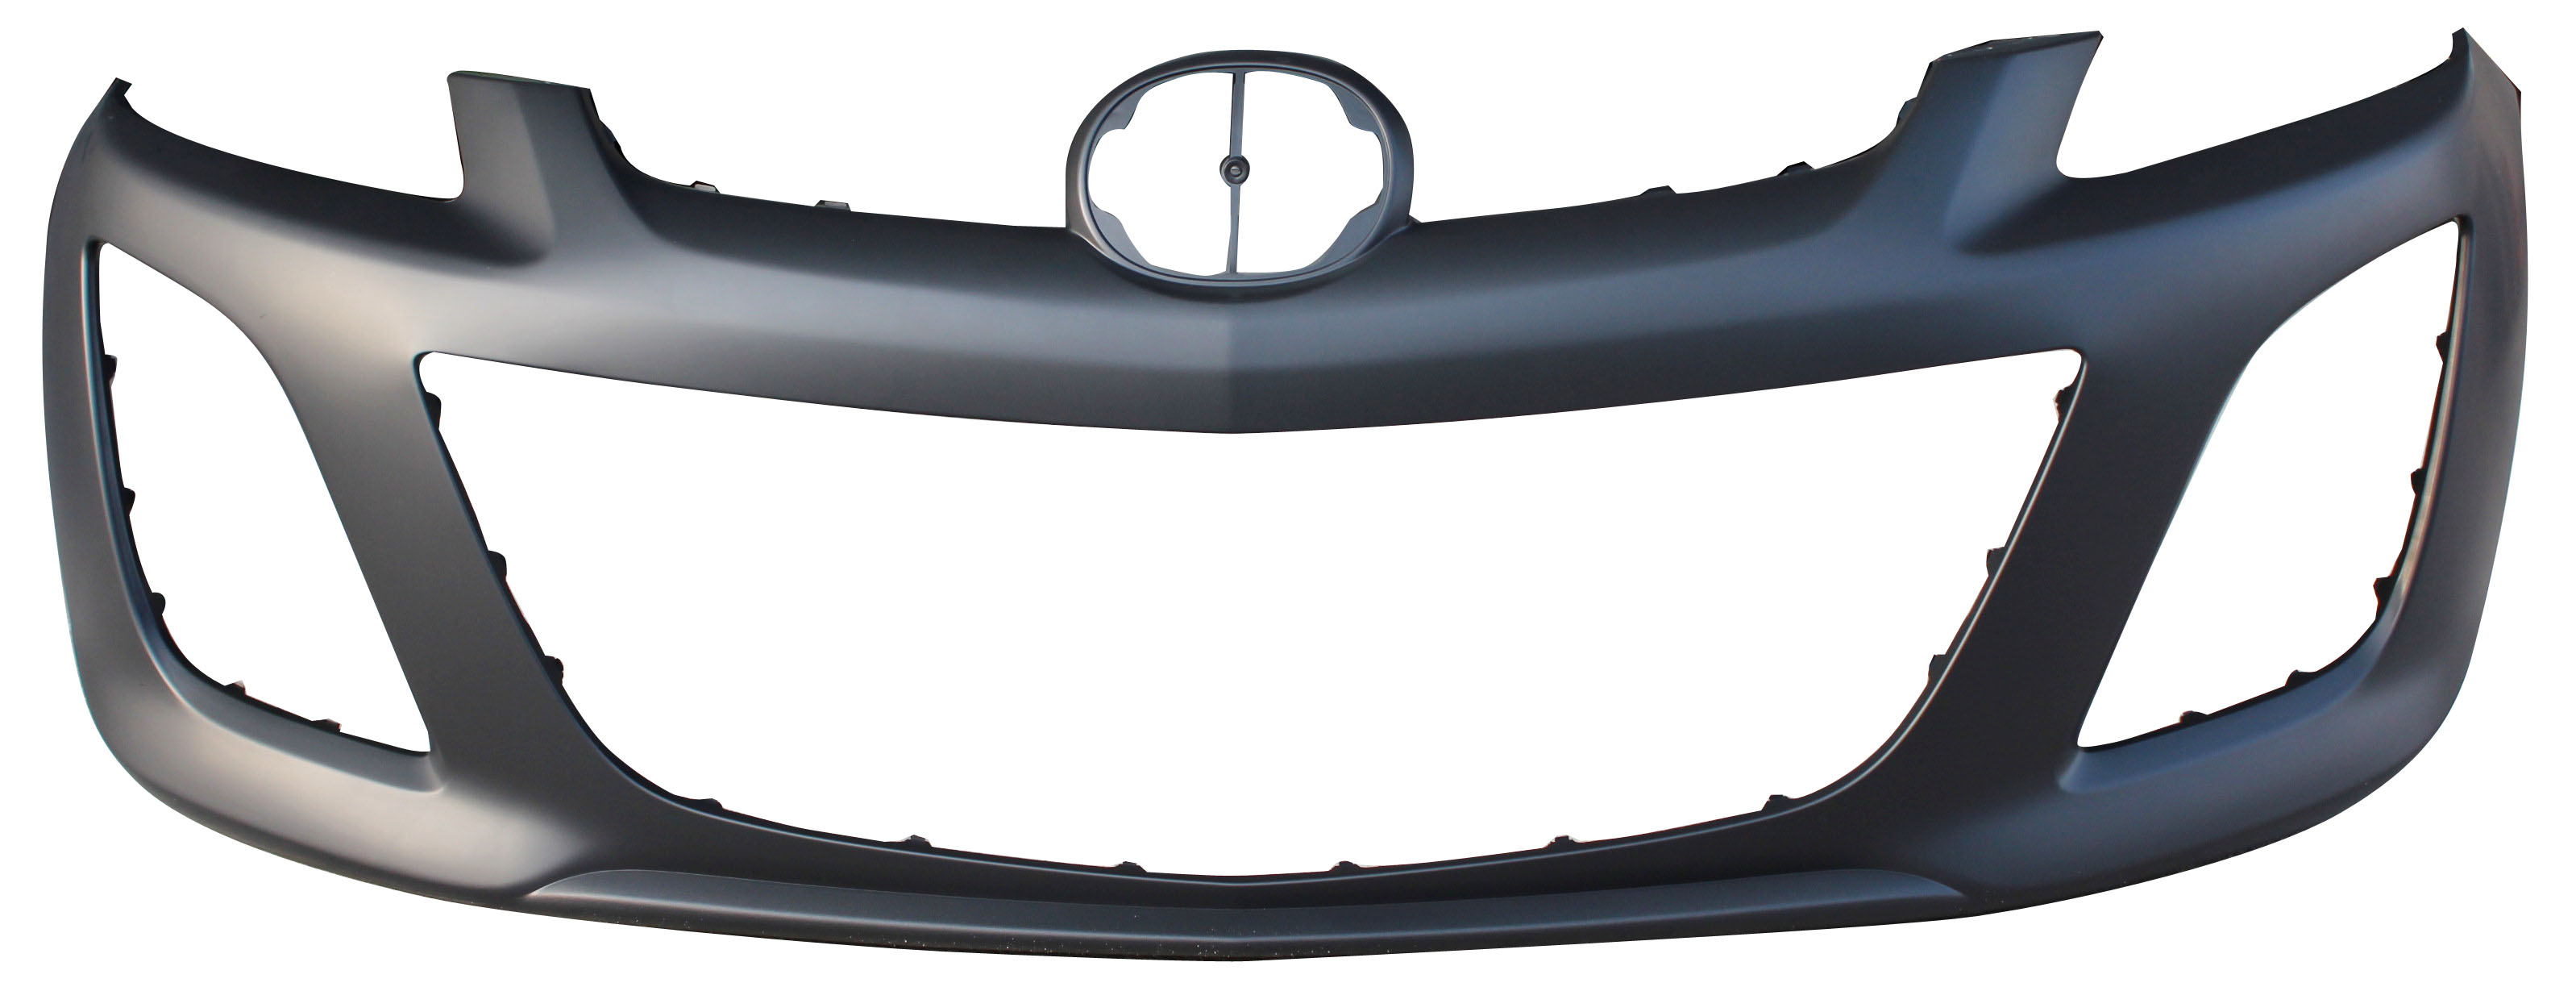 Aftermarket BUMPER COVERS for MAZDA - CX-7, CX-7,10-12,Front bumper cover